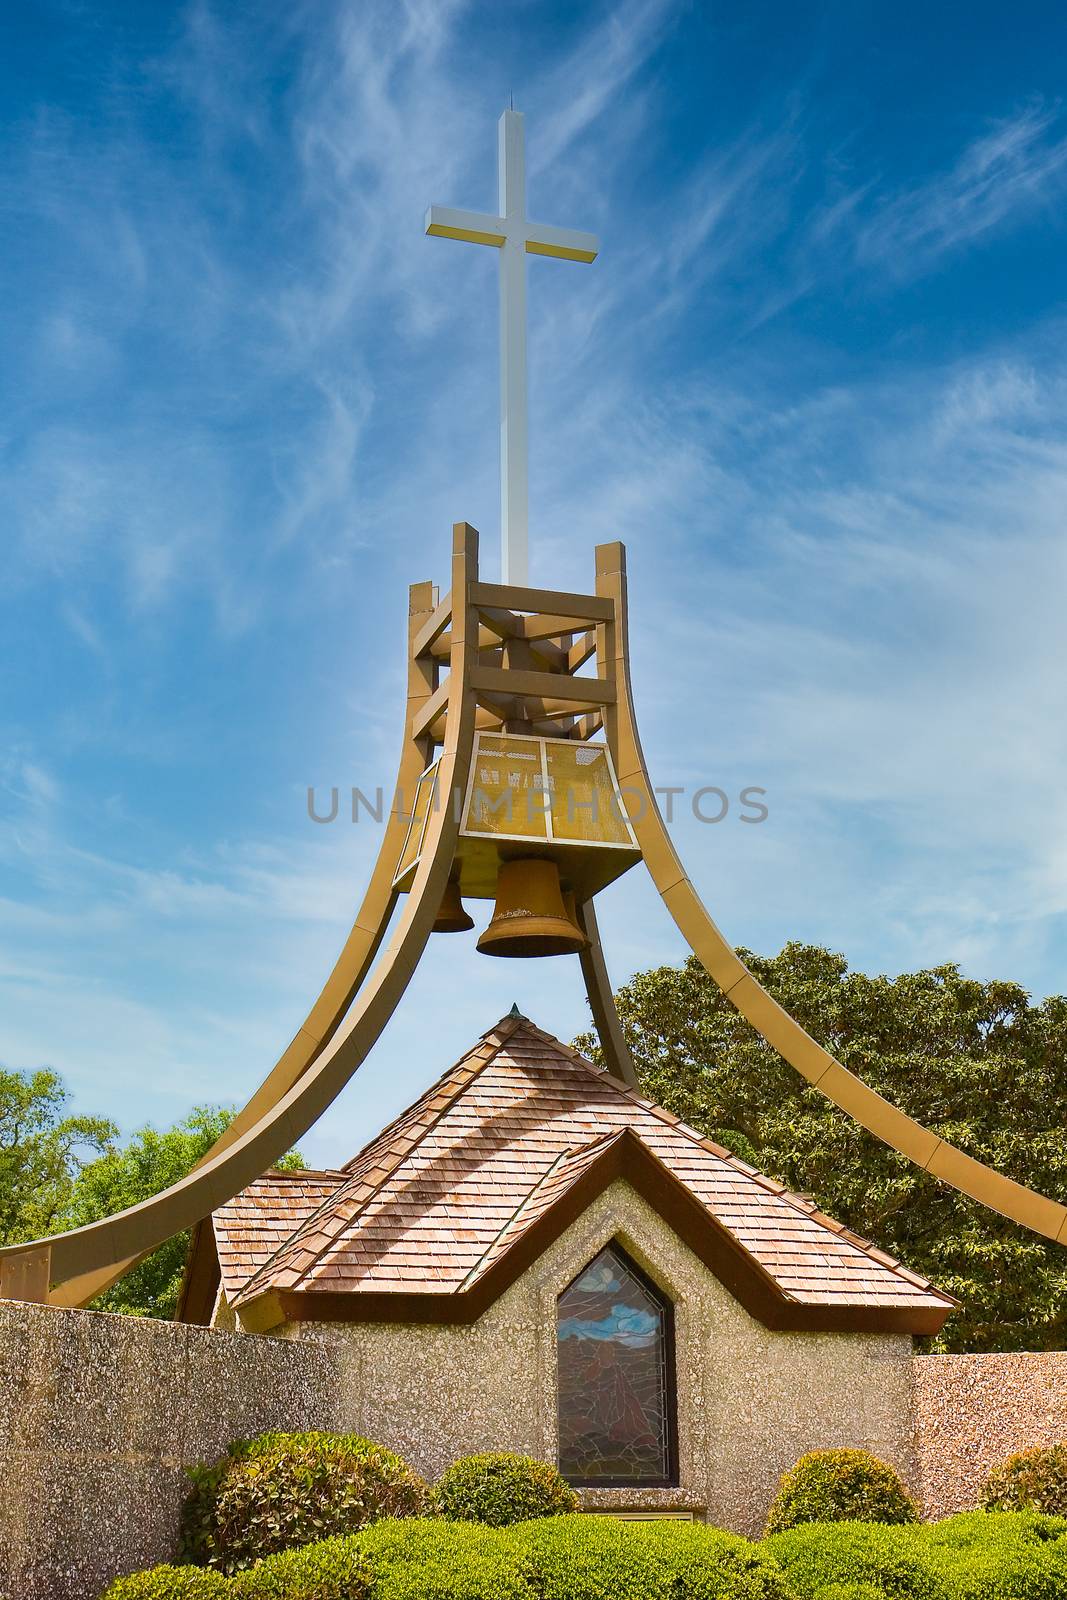 A bell tower and a cross on a display in a public park